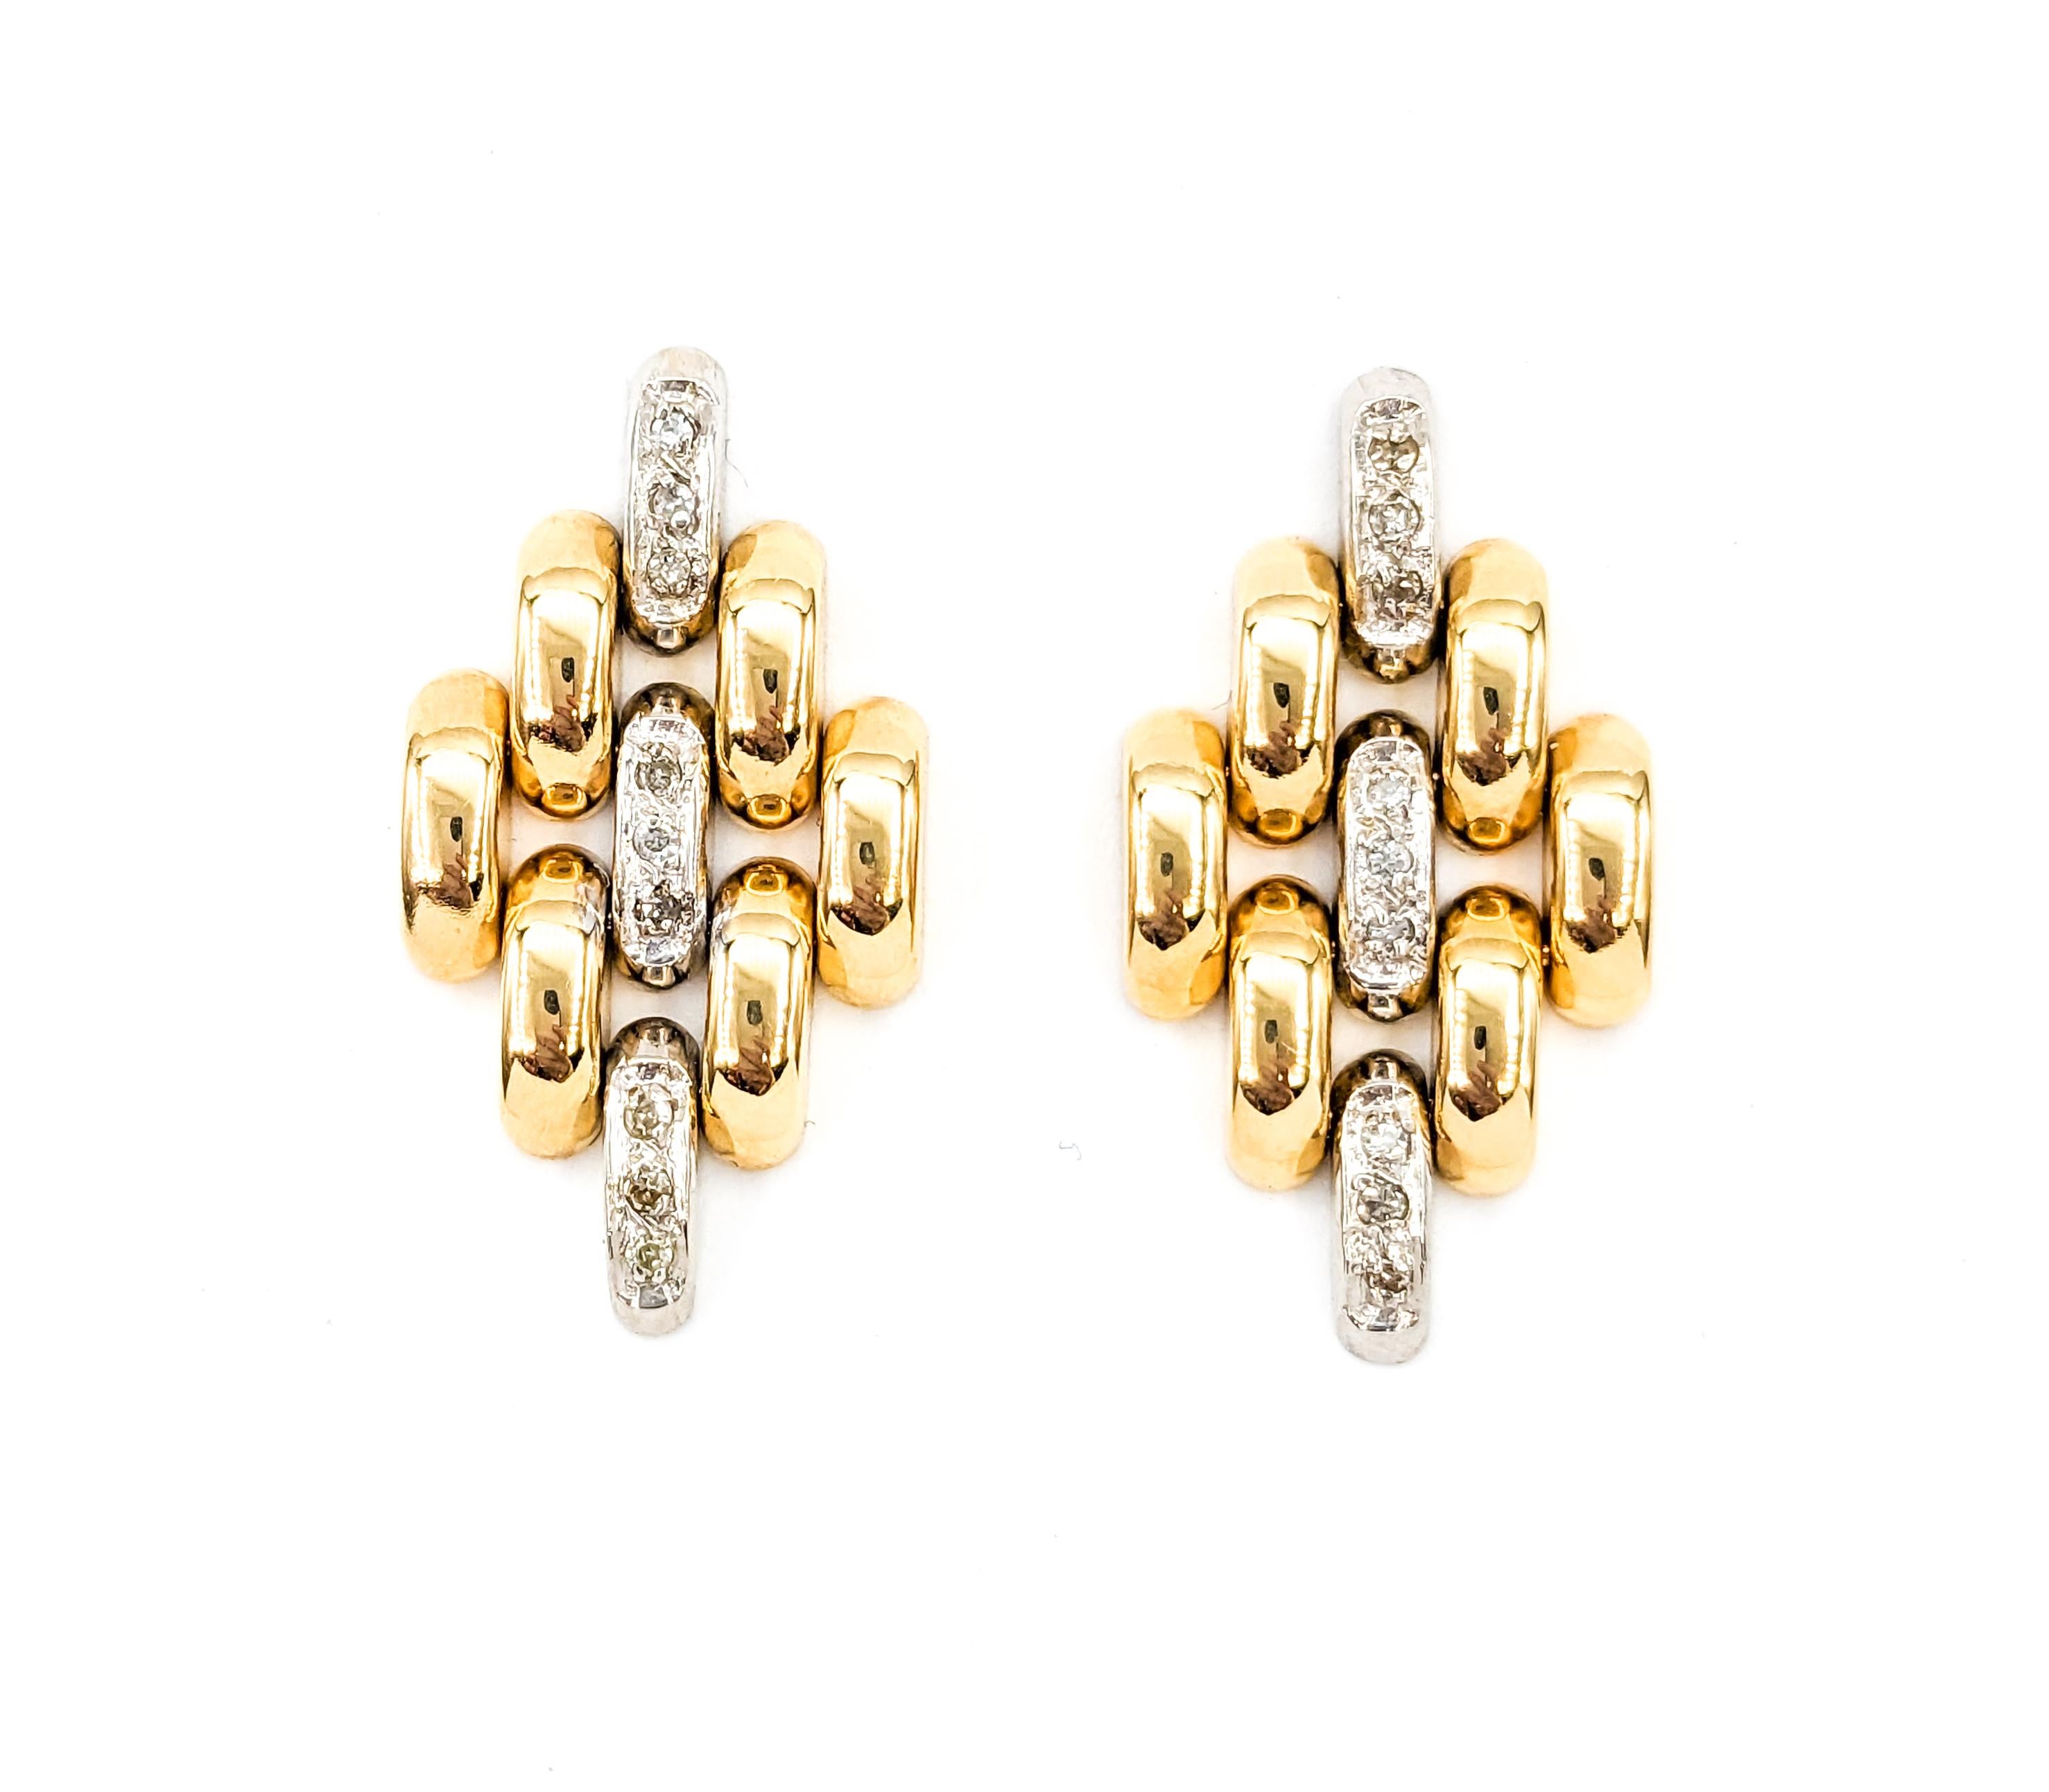 Round Cut Diamond & 14K Gold Panther Link Earrings zin TZwo-Tone Gold For Sale